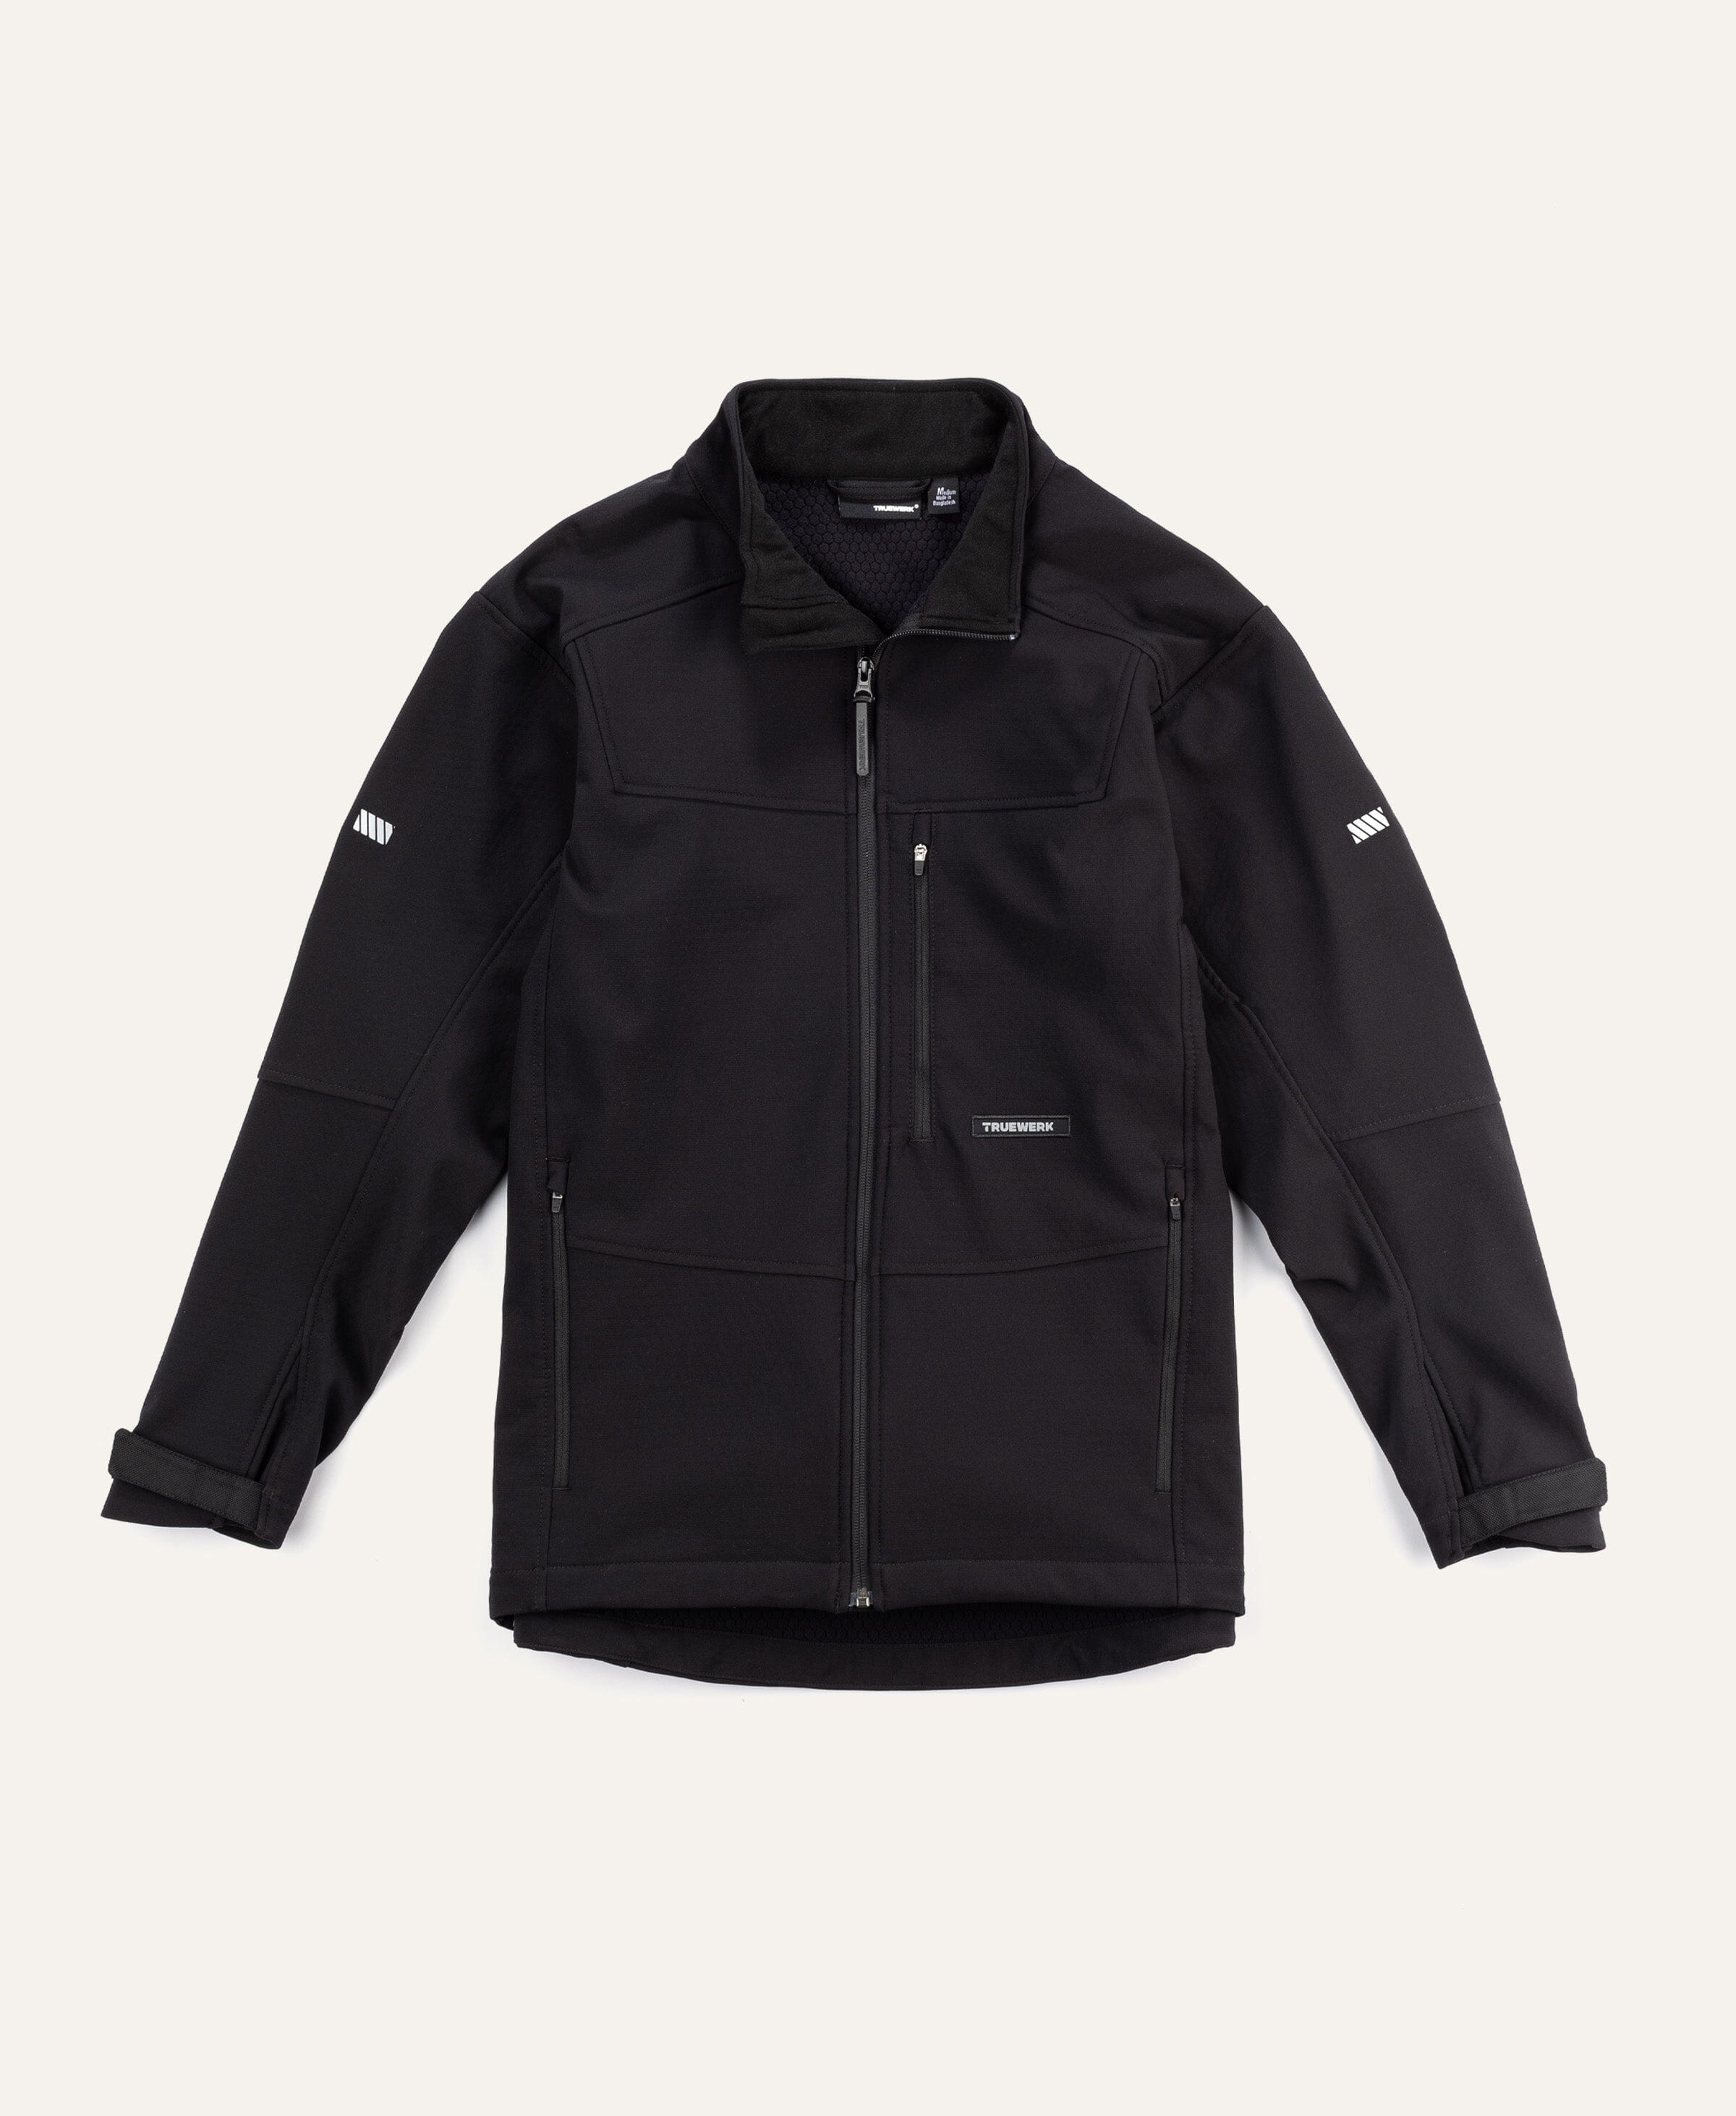 supreme jacket - Best Prices and Online Promos - Men's Apparel Oct